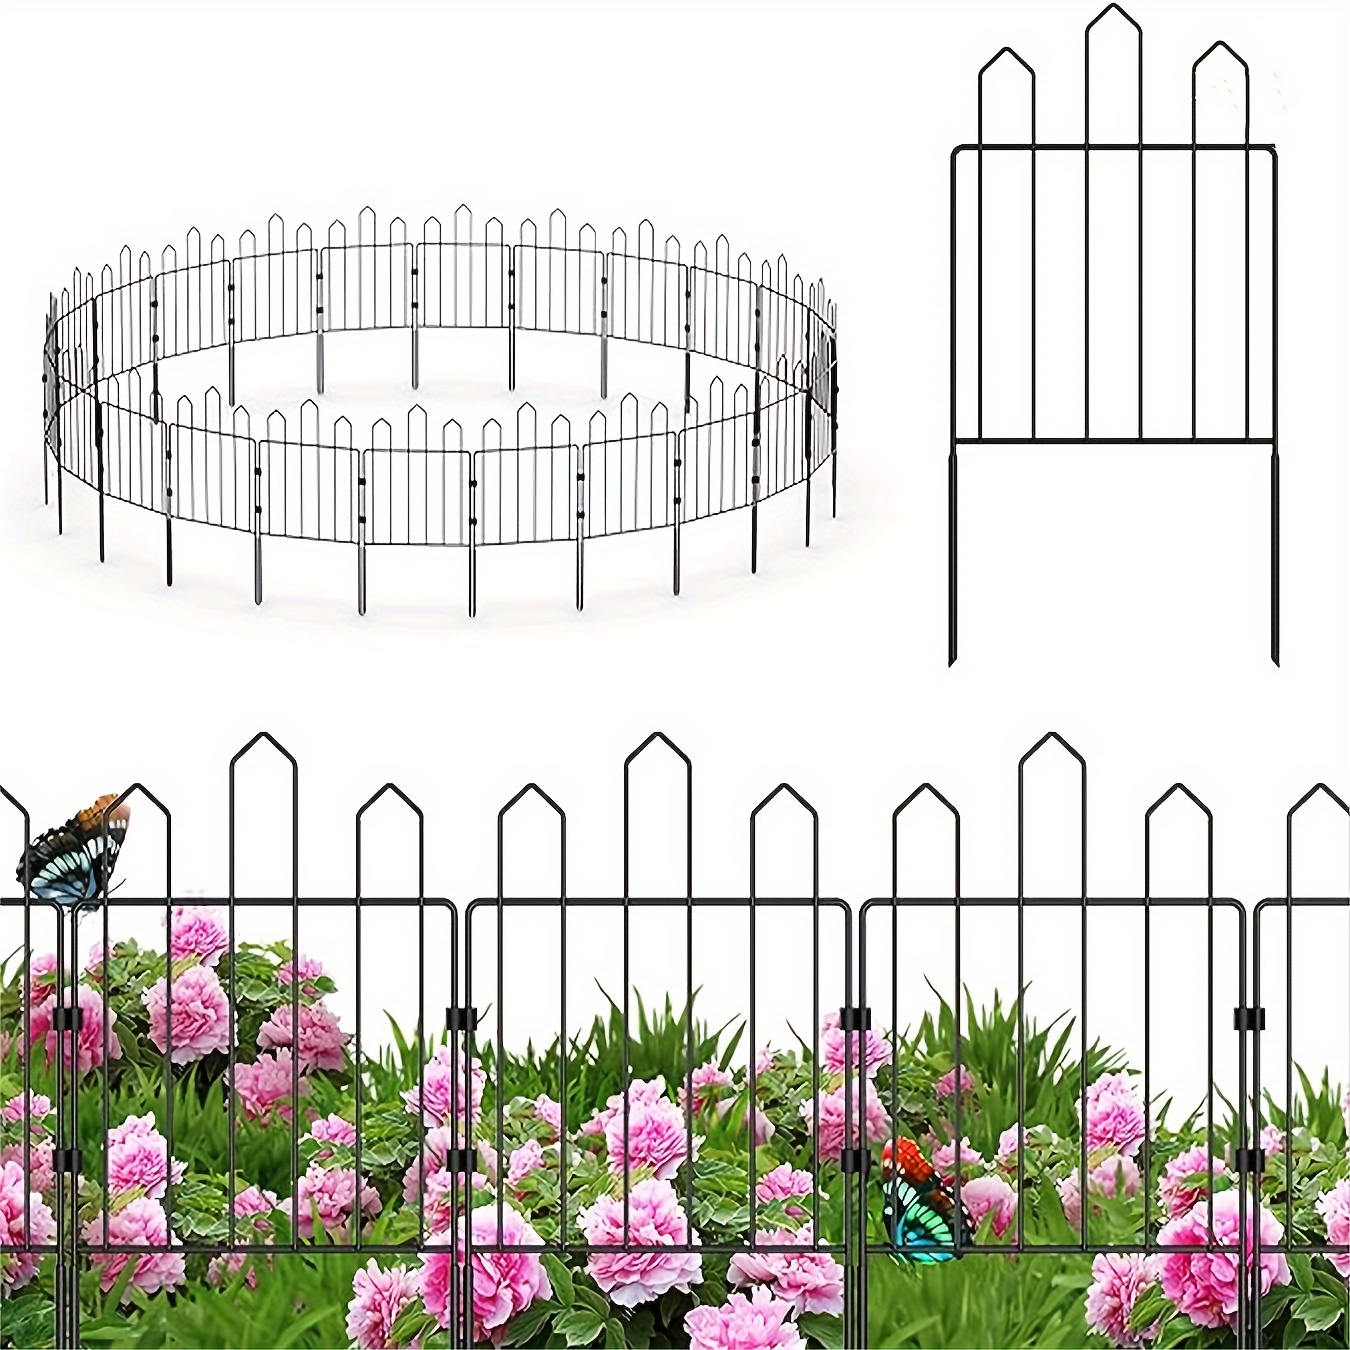 

25 Panels Decorative Garden Fence Border Small Animal Barrier Fence For Dog Rabbit No Dig Fencing Metal Flower Bed Fencing For Yard Landscape Patio Outdoor, Total 26ft (l) X 23.5in (h)